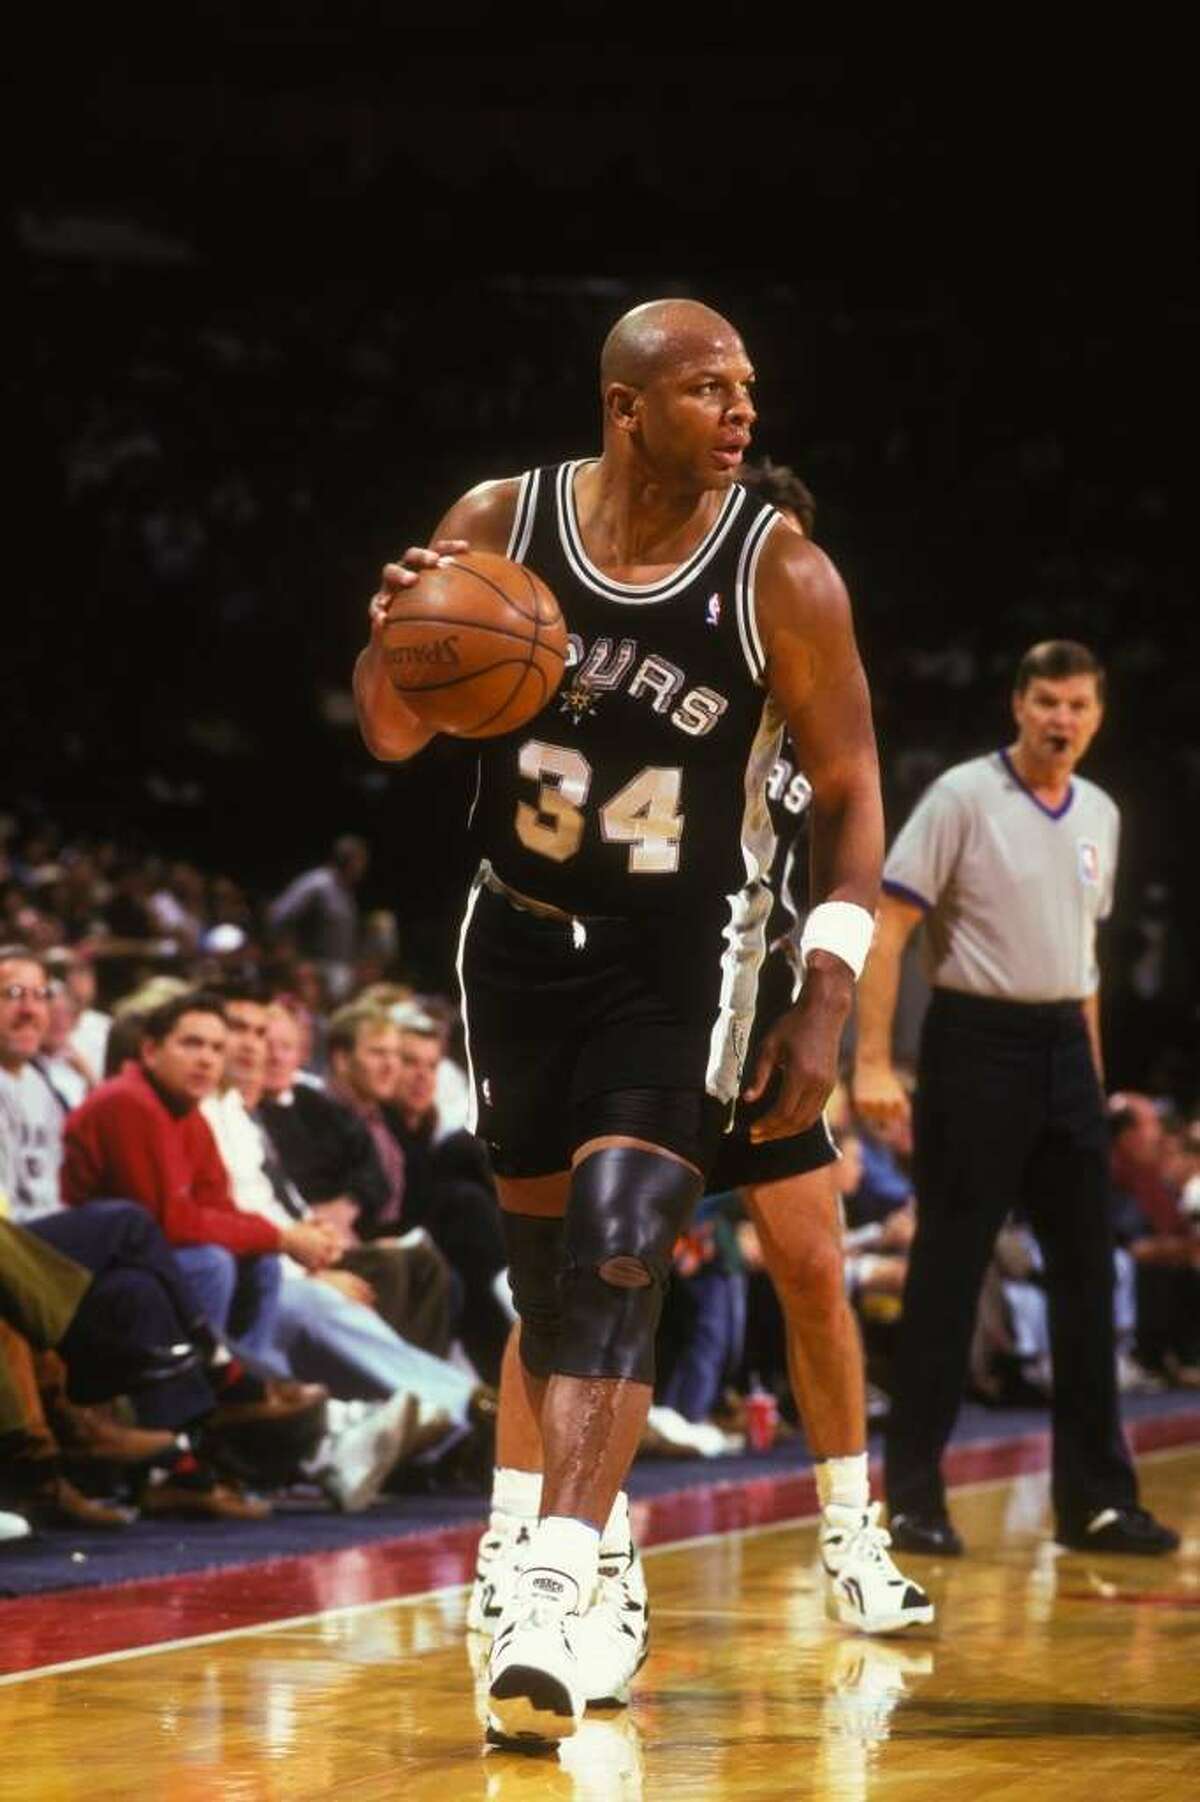 Cummings tore his anterior cruciate ligament in his knee during a pickup game in the 1992-93 off season and would miss 74 games that season.